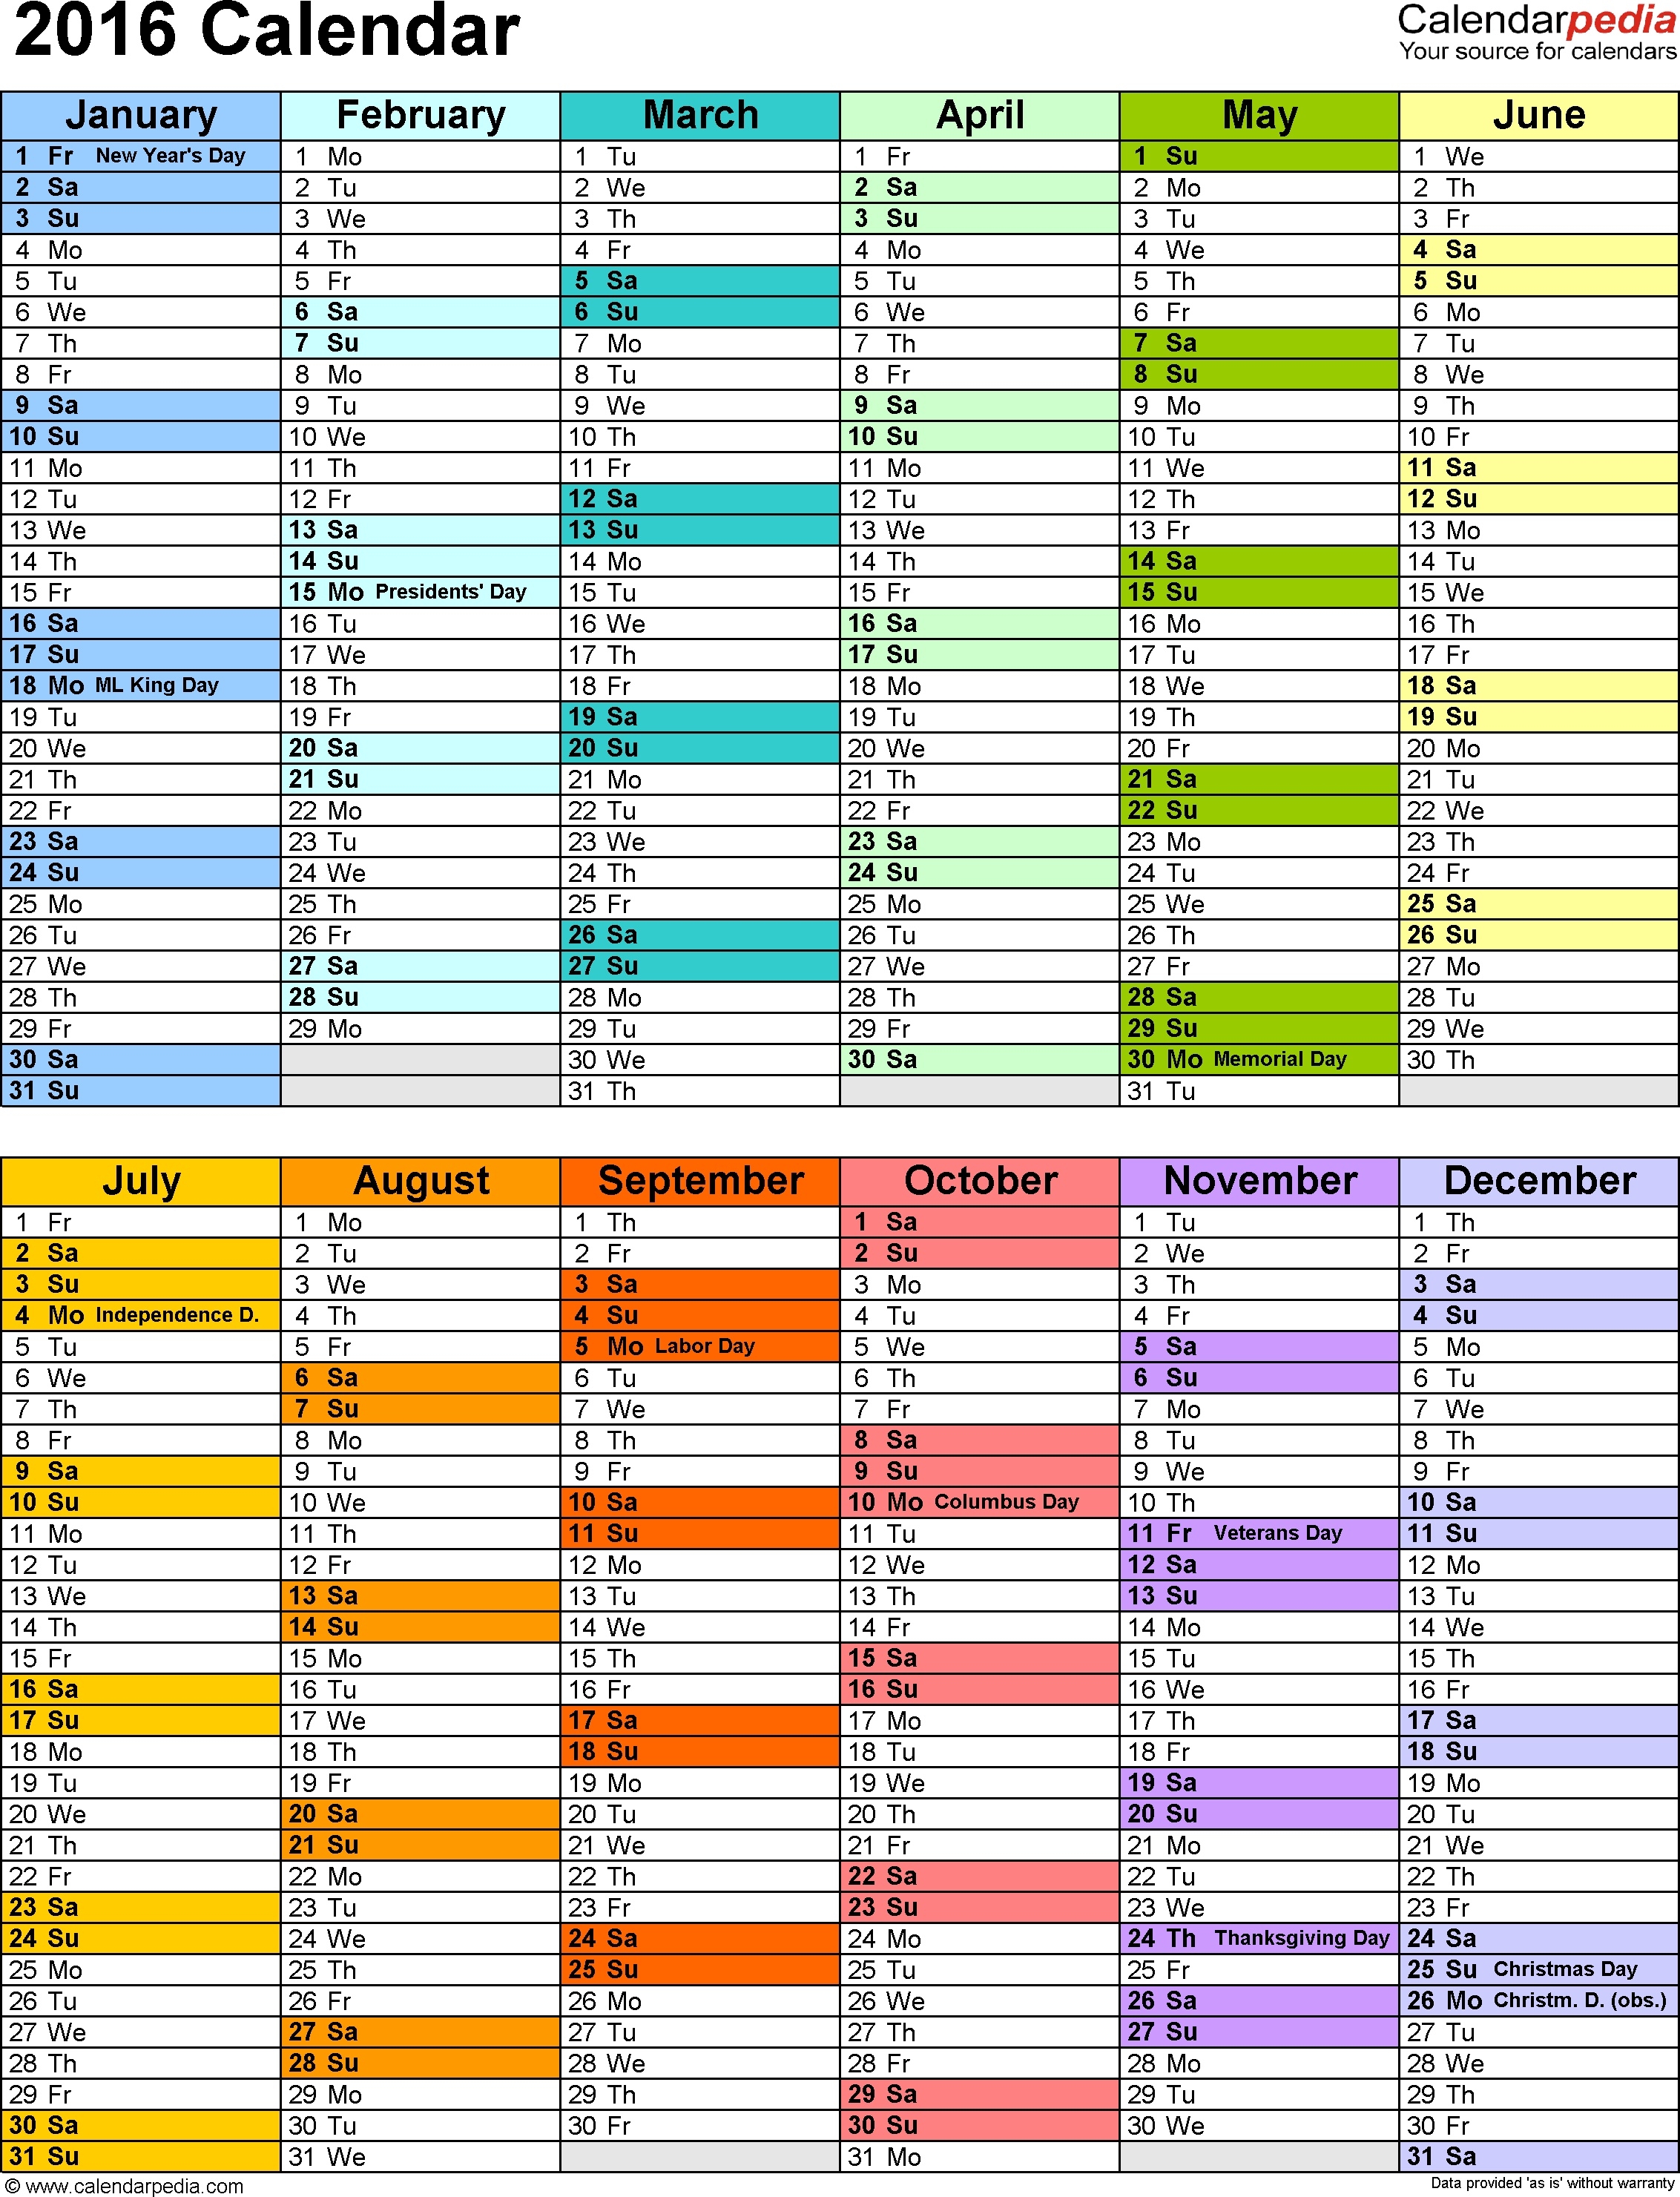 Excel Yearly Schedule Template - Yeniscale.co  Annual Calendar Planner Excel Spreadsheet